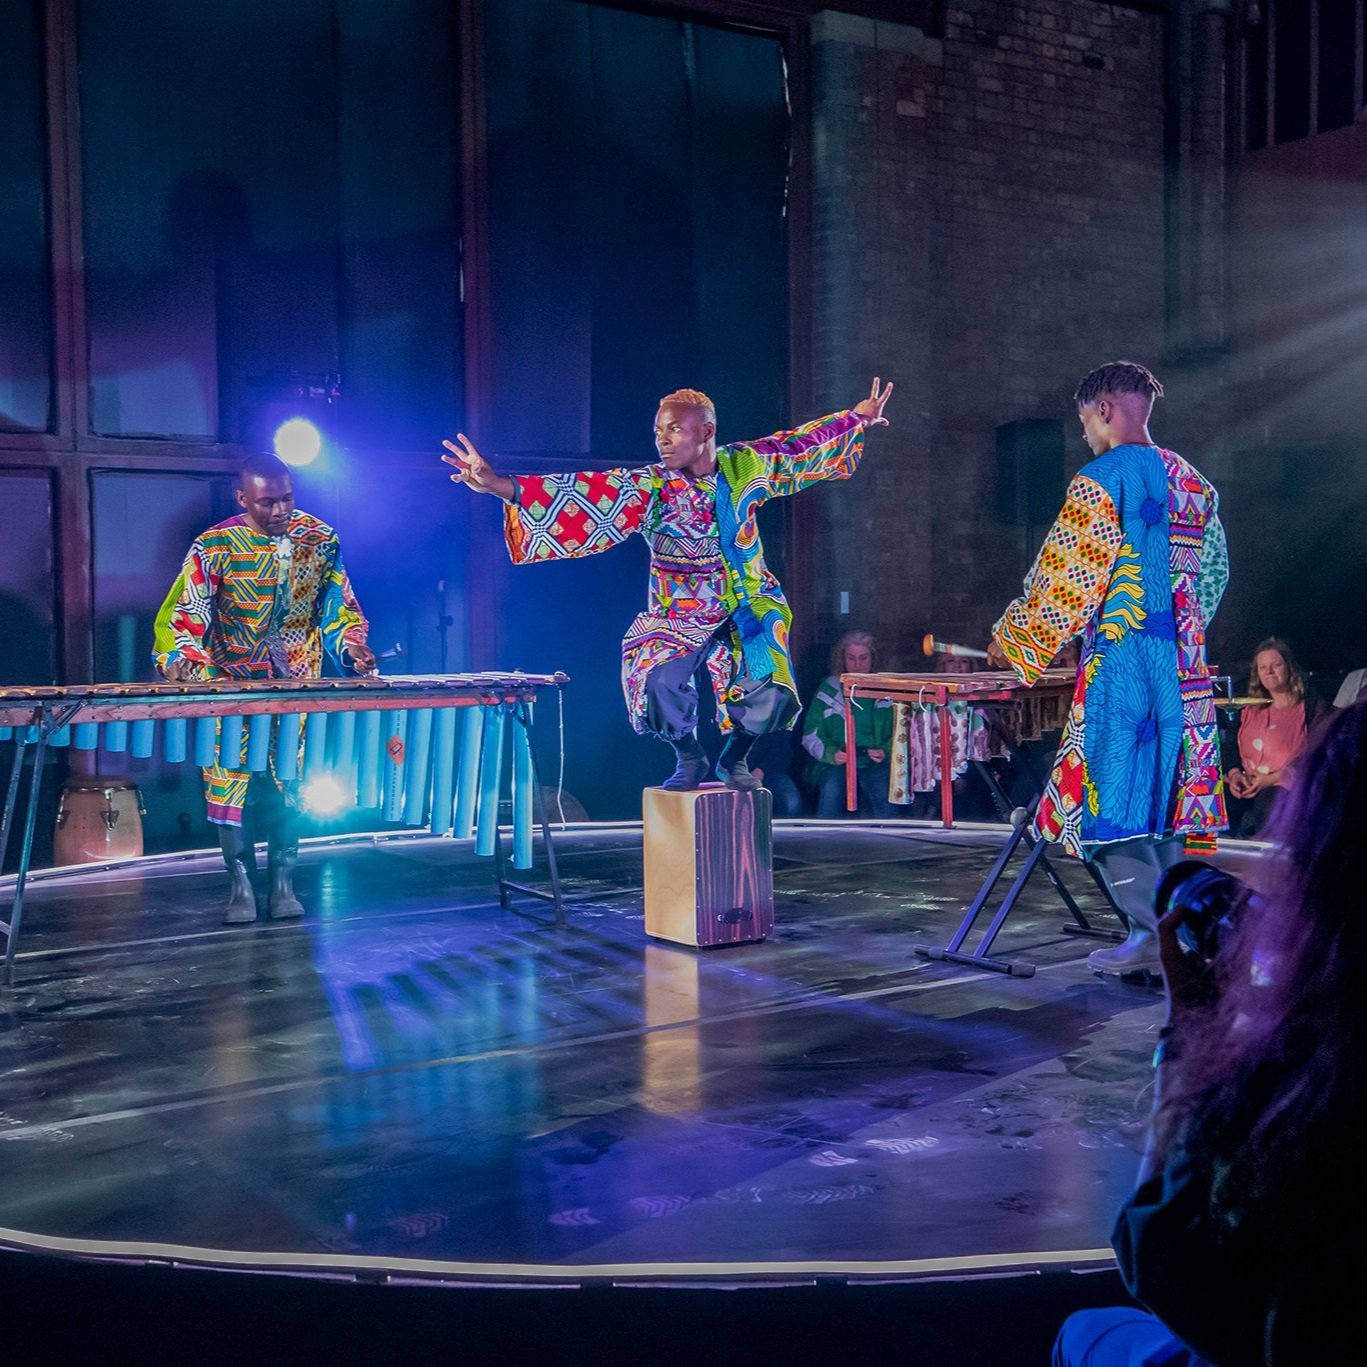  Three Black men in colourful clothing inspired by traditional African dress on a blue-lit stage 